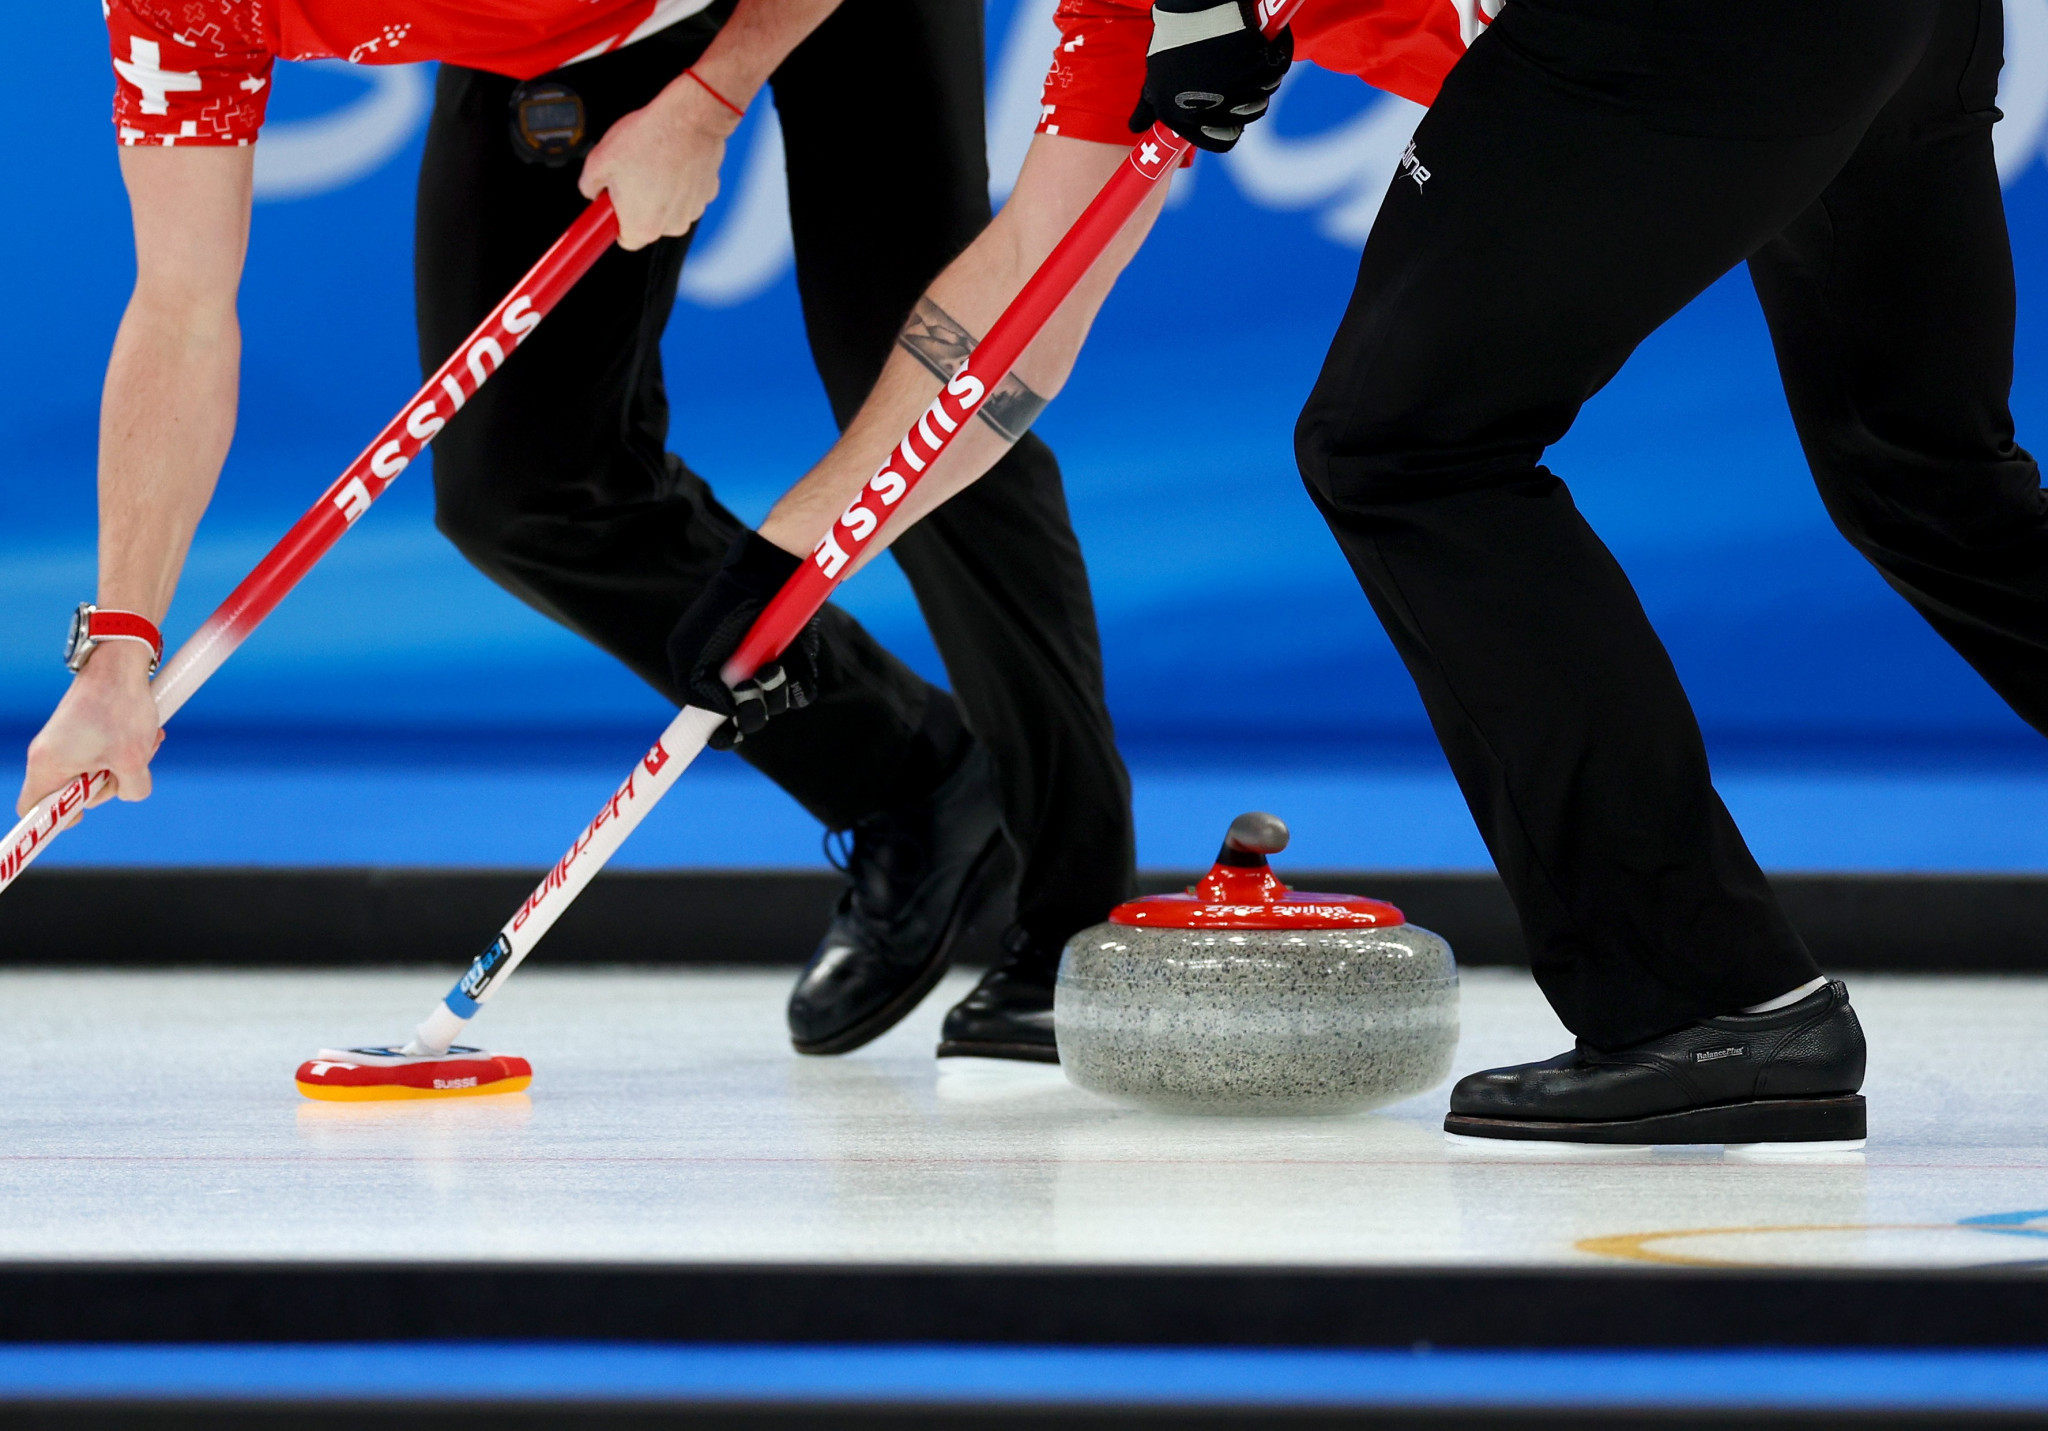 The Saranac Lake Civic Center is set to stage the men's and women's curling tournaments at Lake Placid 2023 ©Getty Images